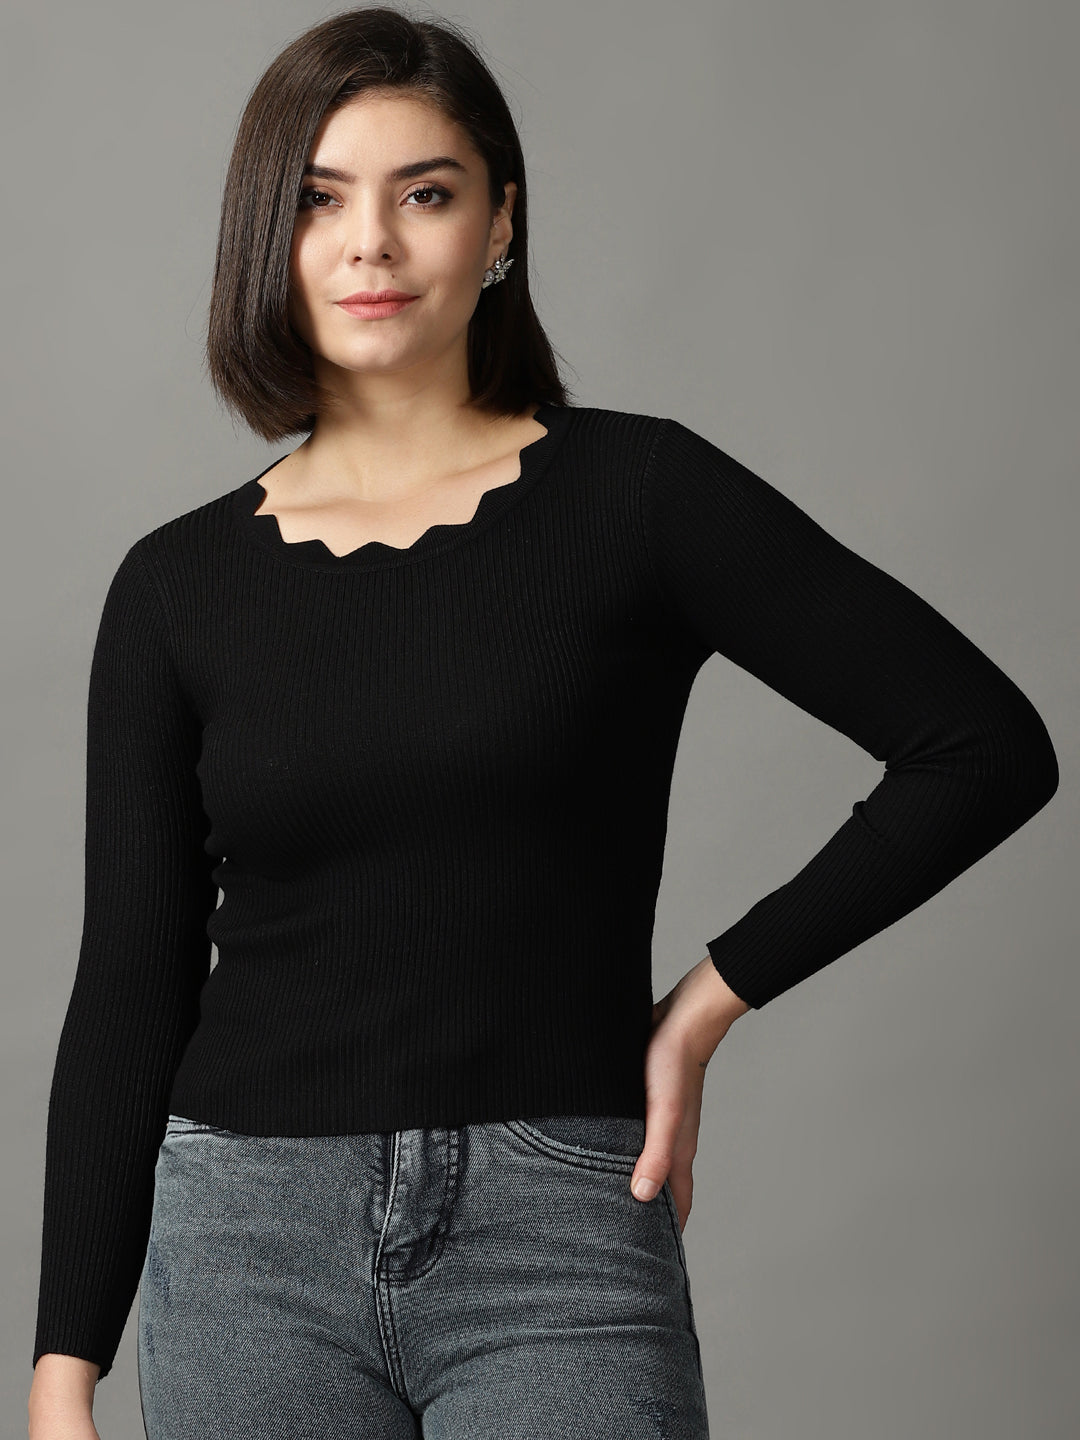 Women's Black Solid Fitted Top